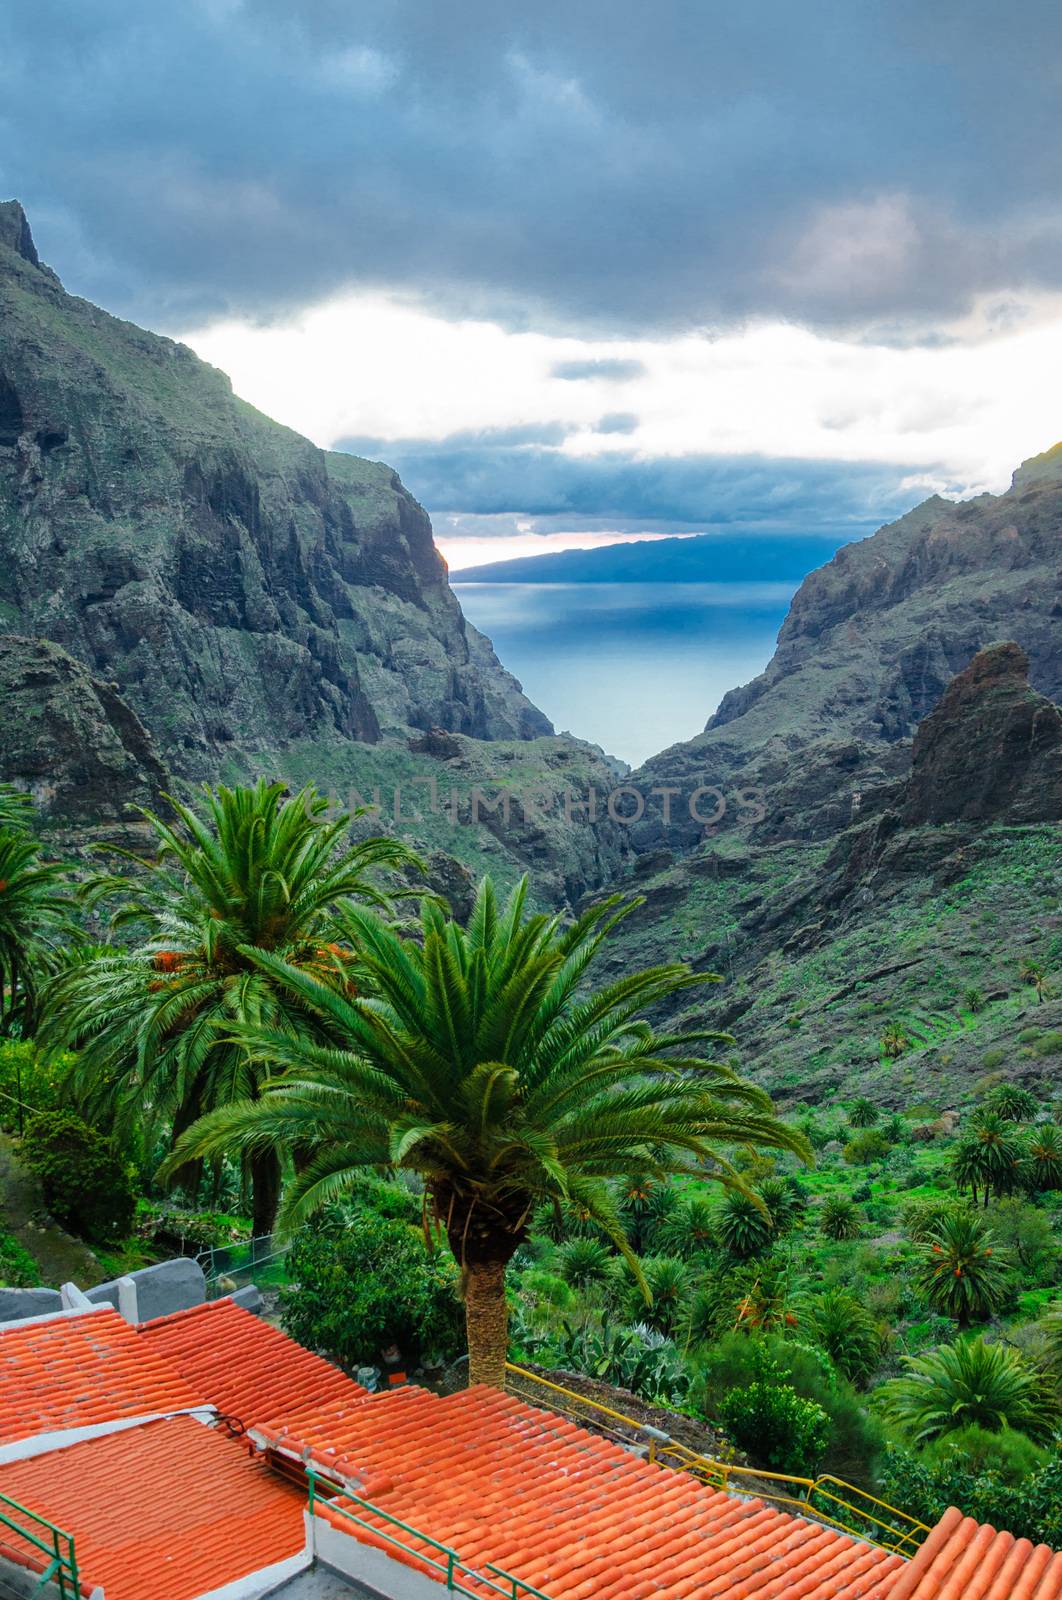 View from Masca village to the canyon and mountains, Tenerife, Canarian Islands